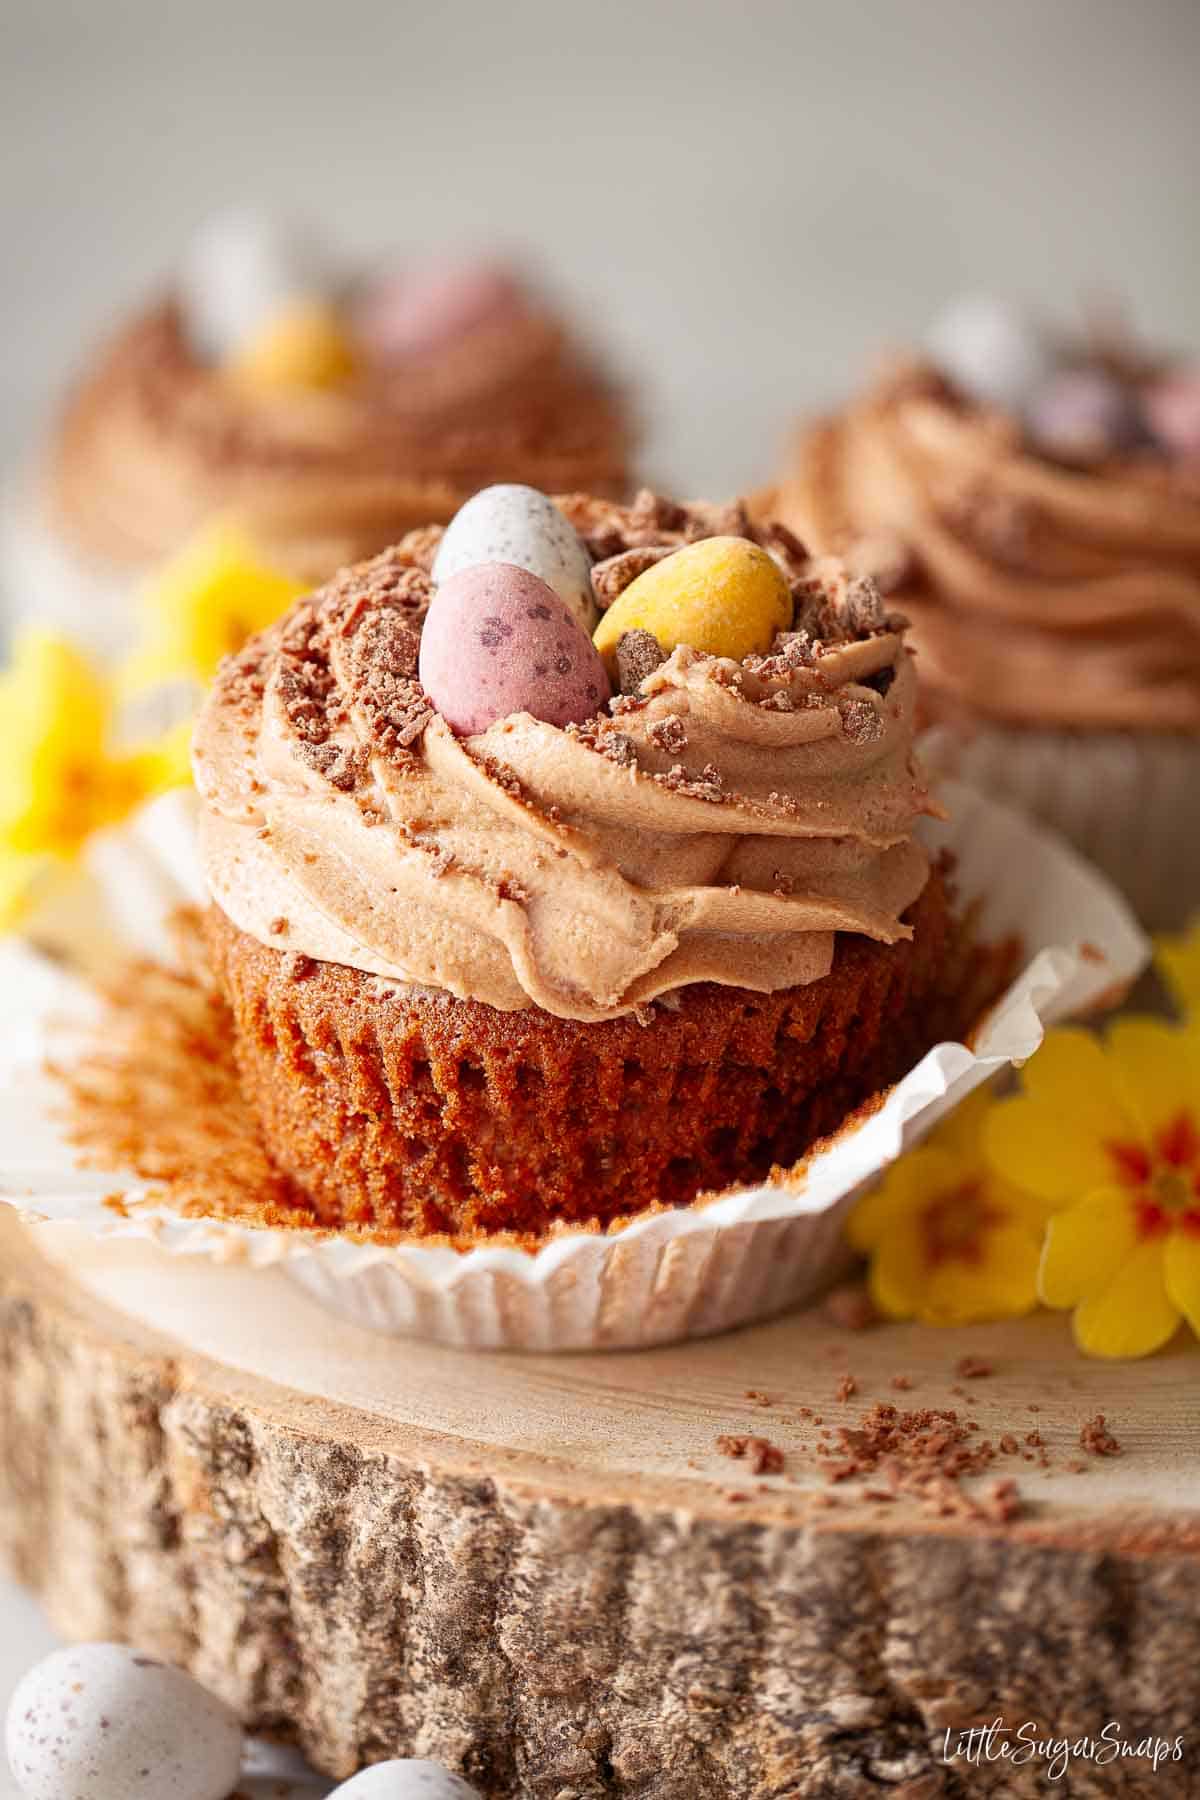 Easter themed chocolate cakes topped with Mini eggs and presented on a wooden board.